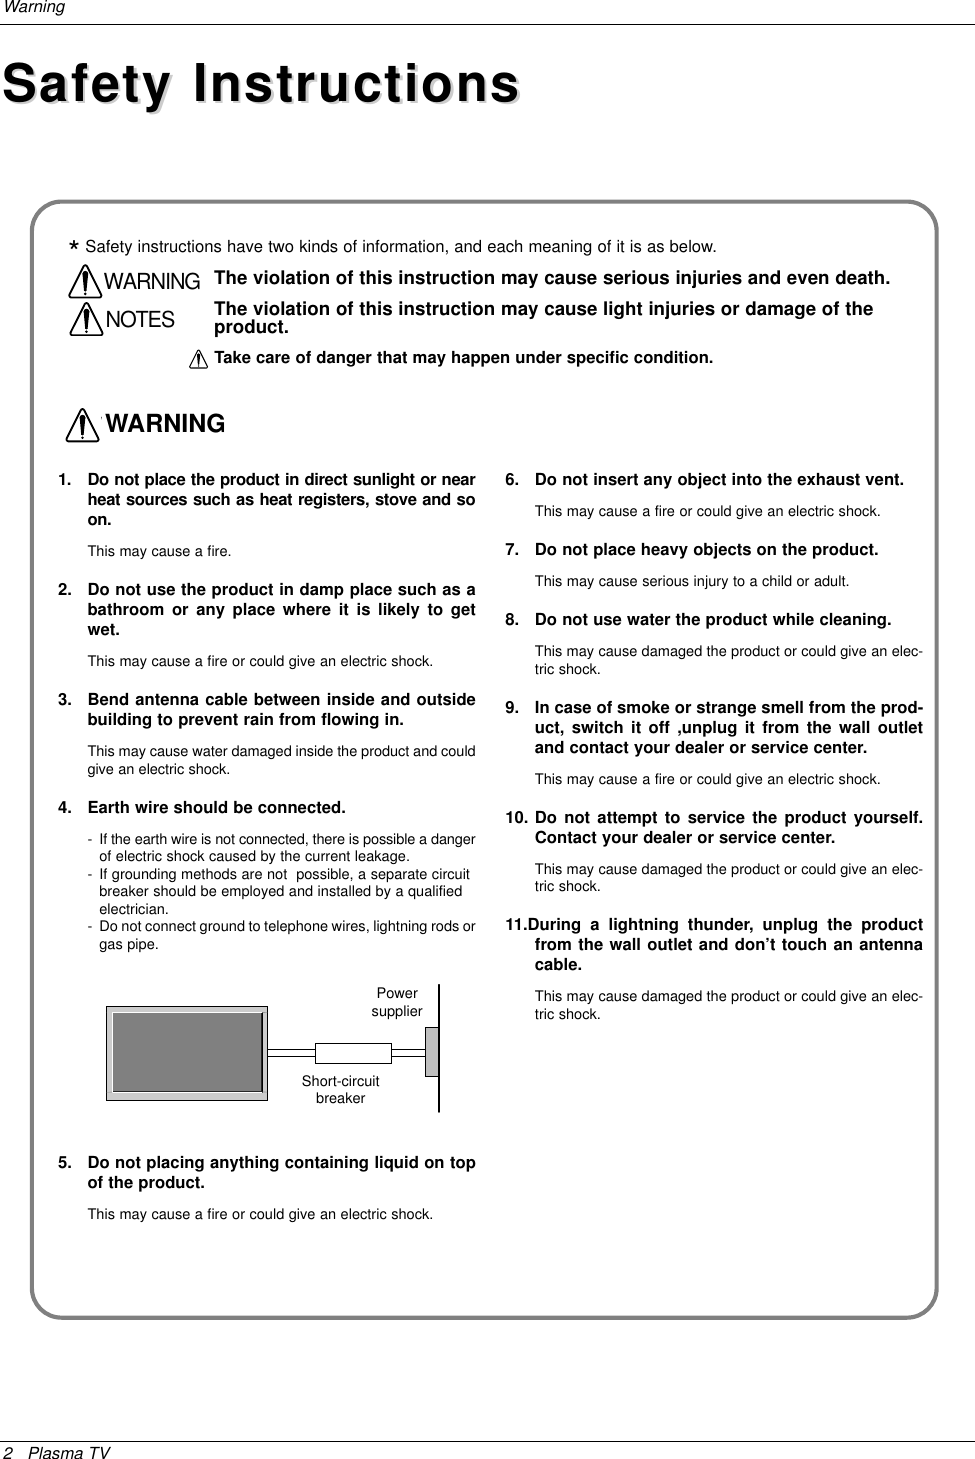 2 Plasma TVWarningSafety InstructionsSafety Instructions1. Do not place the product in direct sunlight or nearheat sources such as heat registers, stove and soon.This may cause a fire.2. Do not use the product in damp place such as abathroom or any place where it is likely to getwet.This may cause a fire or could give an electric shock.3. Bend antenna cable between inside and outsidebuilding to prevent rain from flowing in.This may cause water damaged inside the product and couldgive an electric shock.4. Earth wire should be connected.- If the earth wire is not connected, there is possible a dangerof electric shock caused by the current leakage.- If grounding methods are not  possible, a separate circuit breaker should be employed and installed by a qualified electrician.- Do not connect ground to telephone wires, lightning rods orgas pipe.5. Do not placing anything containing liquid on topof the product.This may cause a fire or could give an electric shock.6. Do not insert any object into the exhaust vent.This may cause a fire or could give an electric shock.7. Do not place heavy objects on the product.This may cause serious injury to a child or adult.8. Do not use water the product while cleaning.This may cause damaged the product or could give an elec-tric shock.9. In case of smoke or strange smell from the prod-uct, switch it off ,unplug it from the wall outletand contact your dealer or service center.This may cause a fire or could give an electric shock.10. Do not attempt to service the product yourself.Contact your dealer or service center. This may cause damaged the product or could give an elec-tric shock.11.During a lightning thunder, unplug the productfrom the wall outlet and don’t touch an antennacable. This may cause damaged the product or could give an elec-tric shock.WWARNING*Safety instructions have two kinds of information, and each meaning of it is as below.Take care of danger that may happen under specific condition.The violation of this instruction may cause serious injuries and even death.The violation of this instruction may cause light injuries or damage of theproduct.WARNINGNOTESPowersupplierShort-circuitbreaker